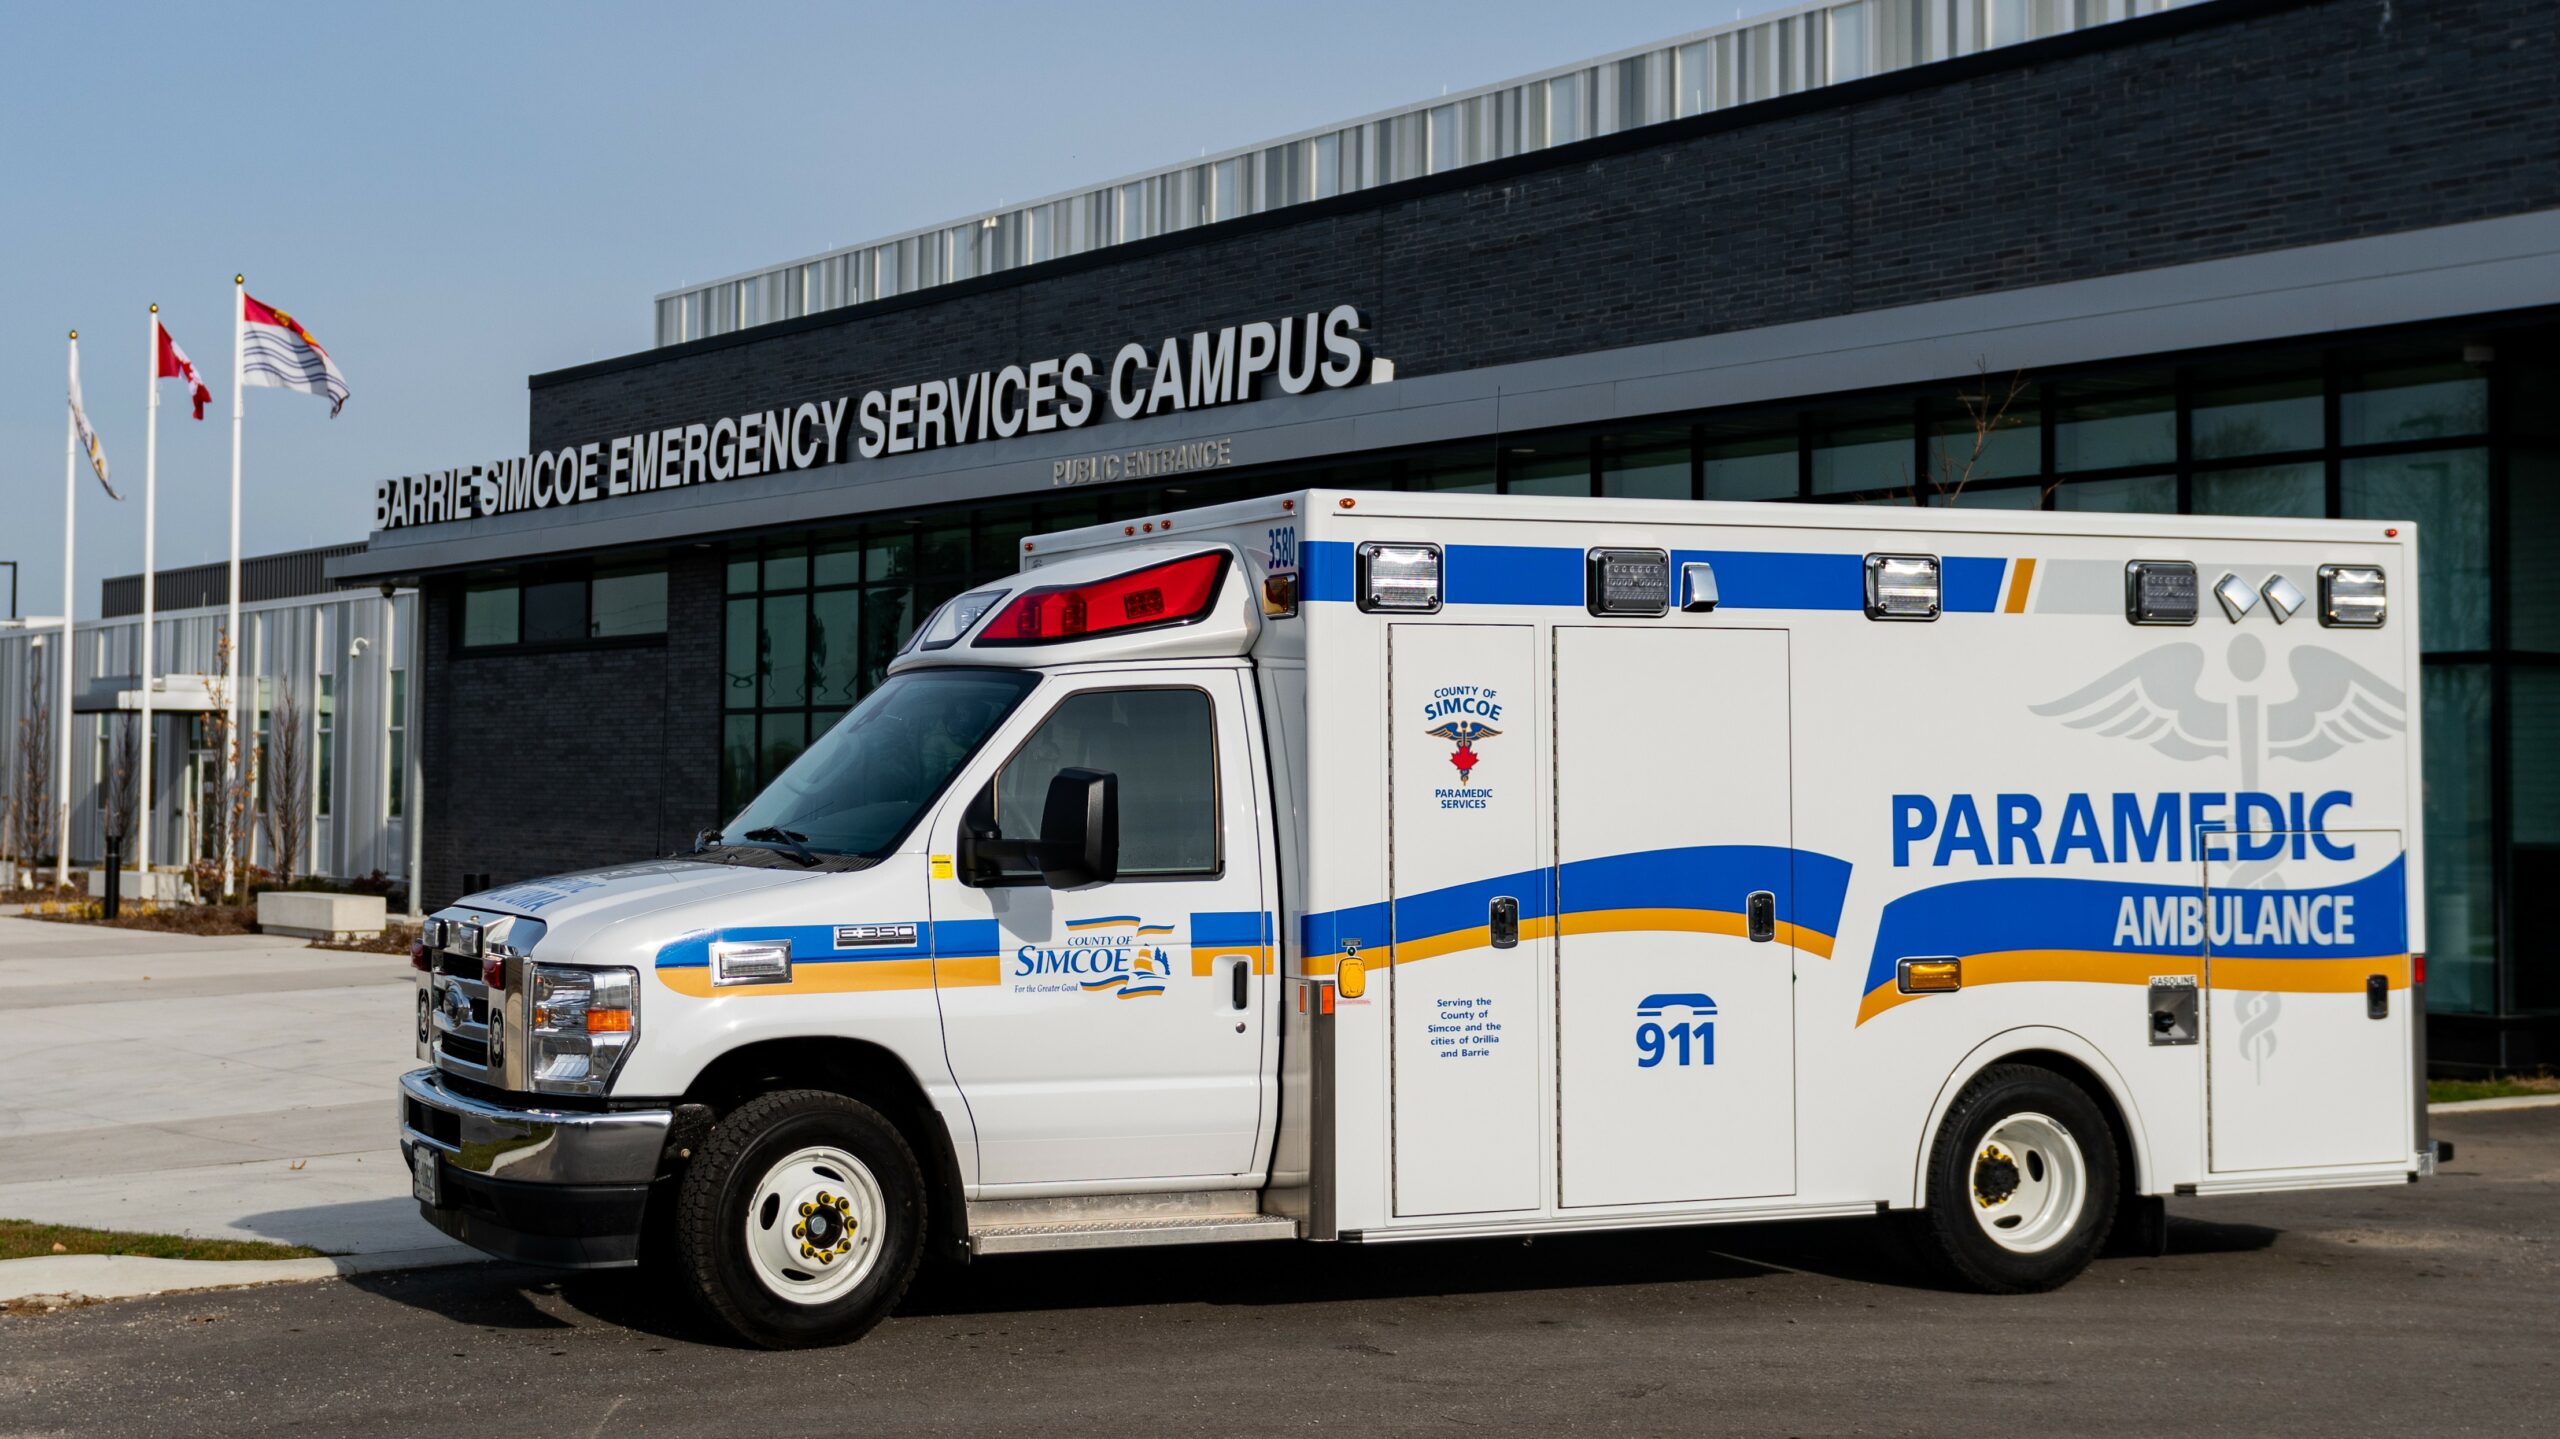 Paramedic Services Background Image